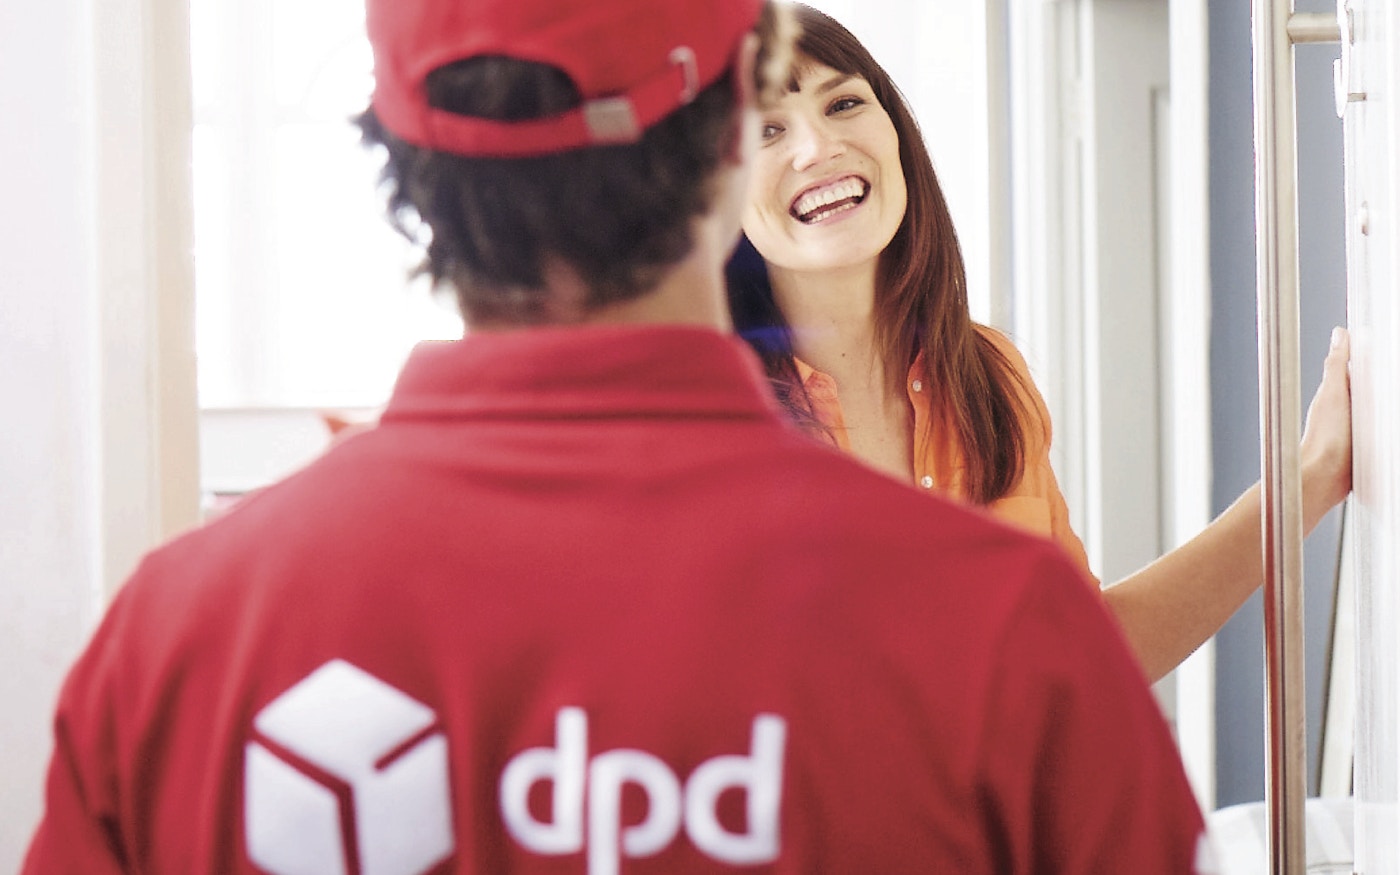 DPDgroup Europe's delivery experts